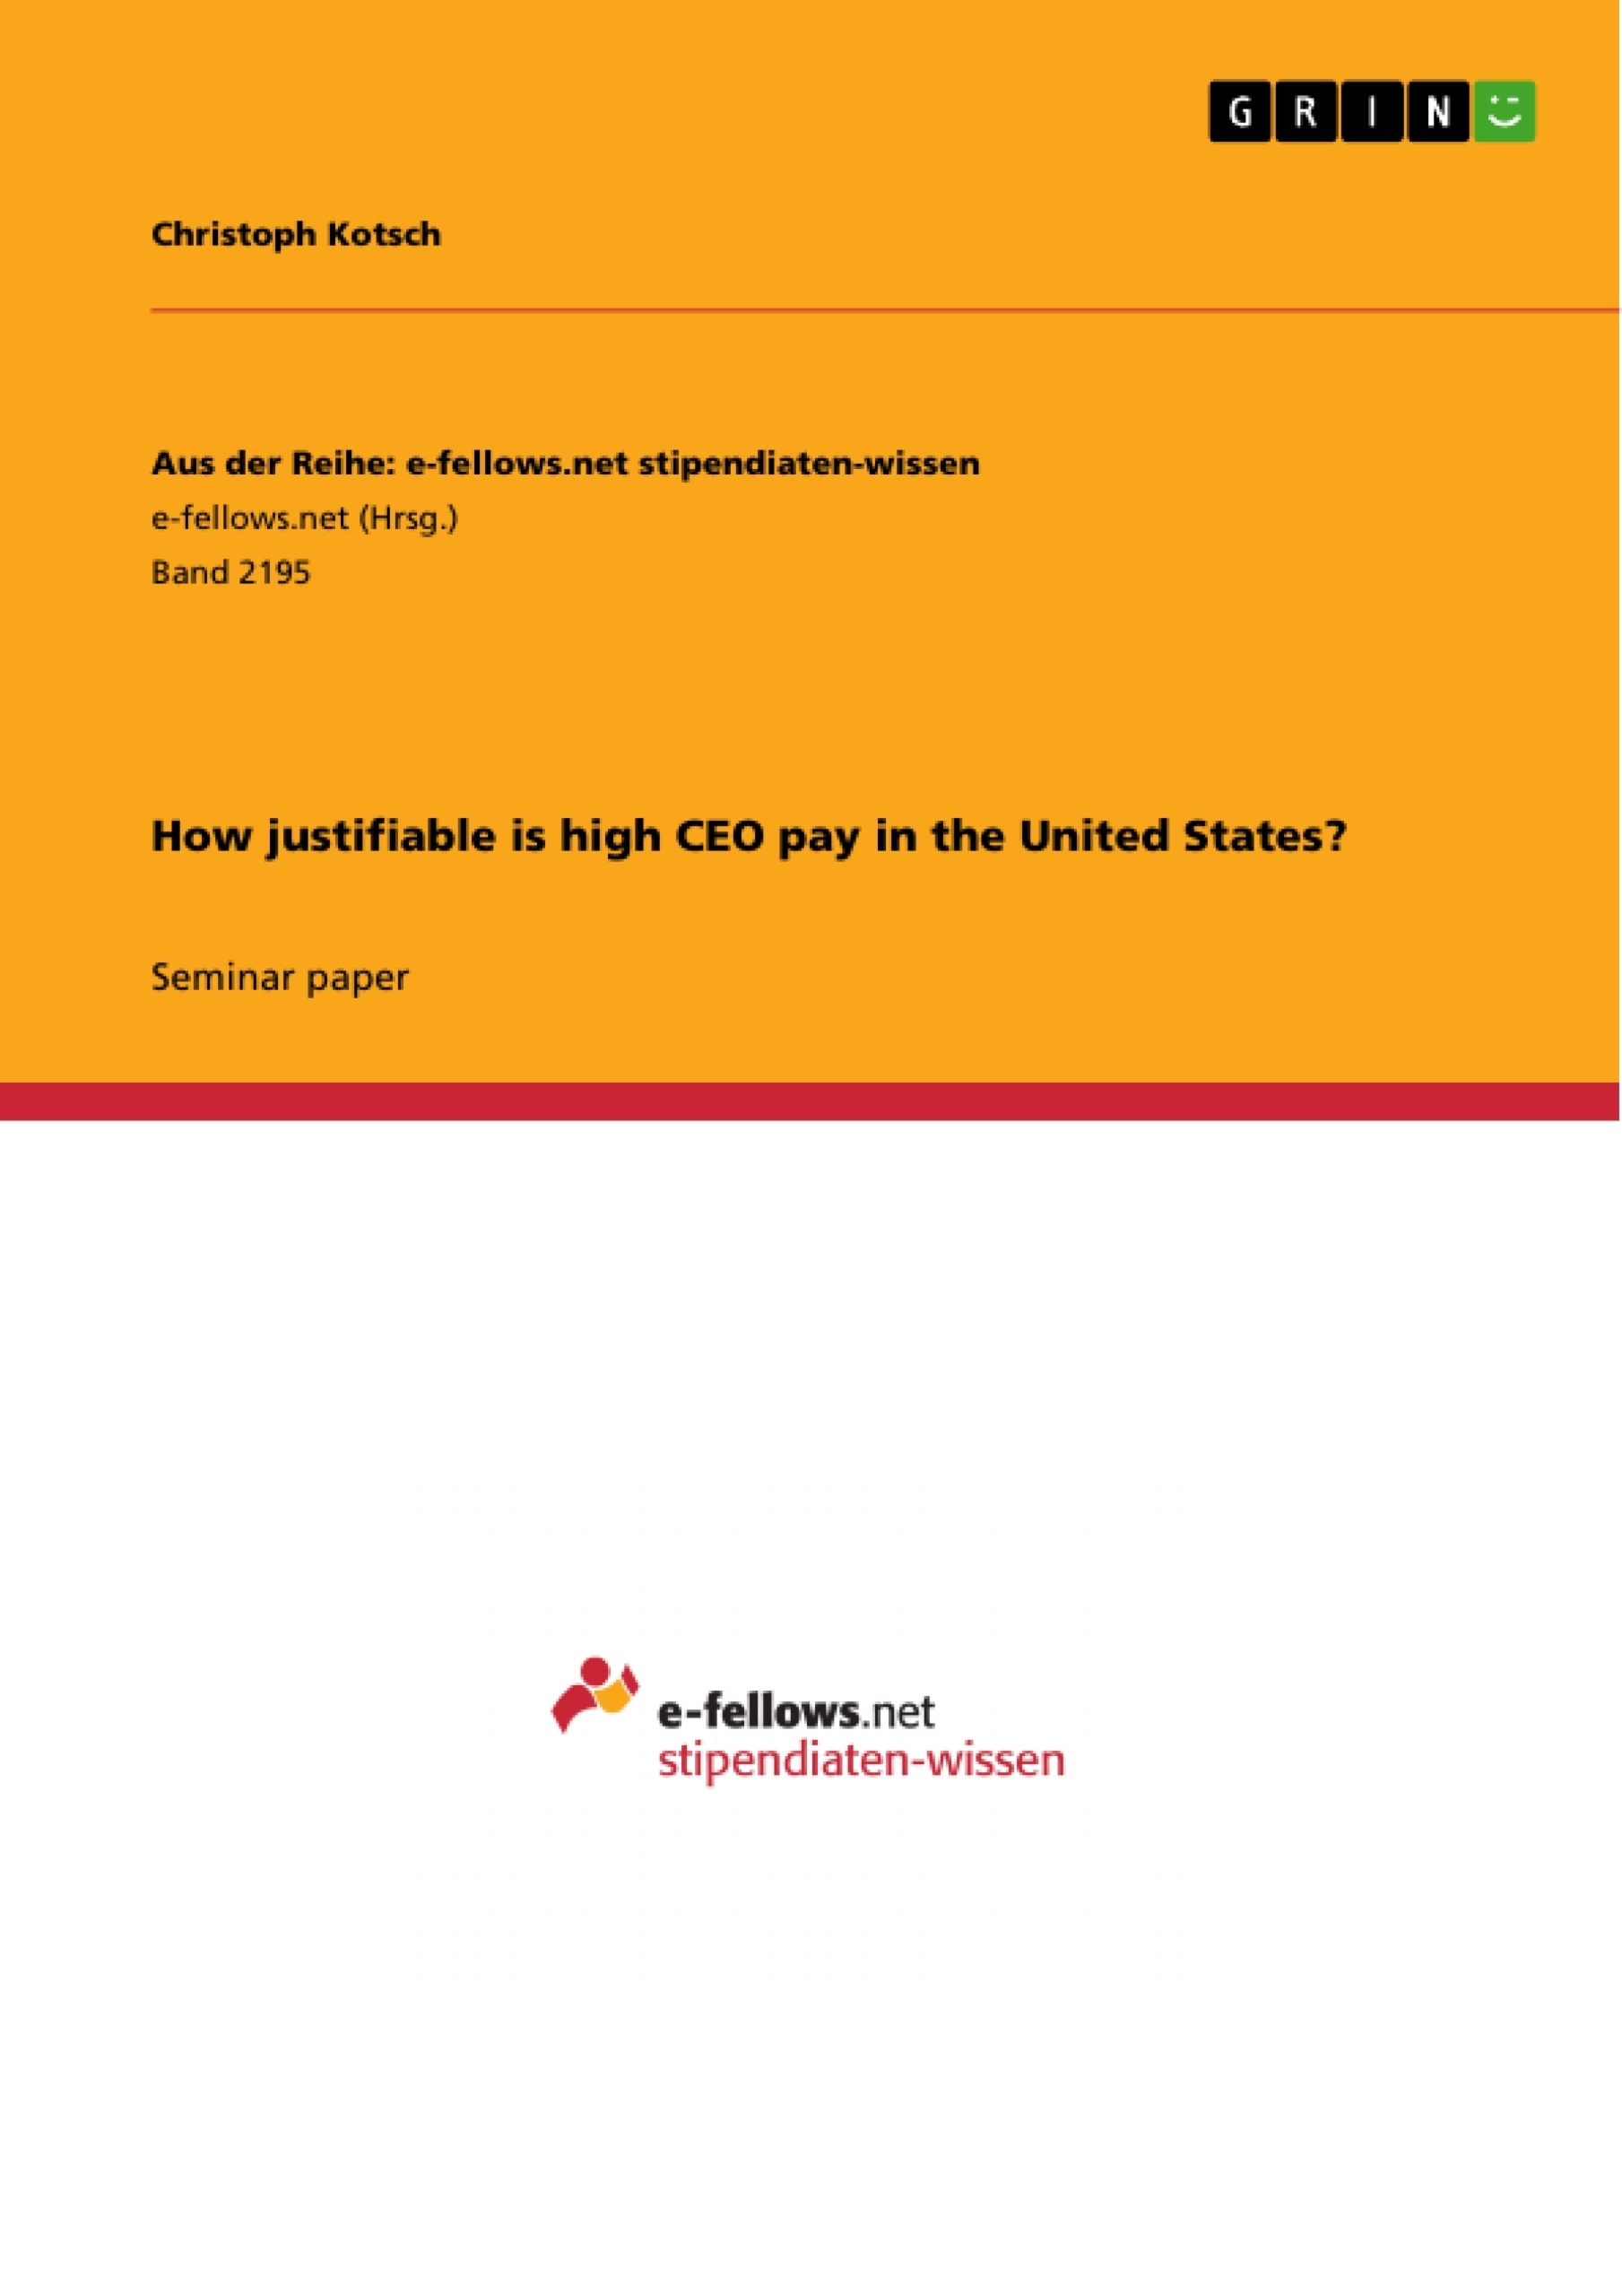 Title: How justifiable is high CEO pay in the United States?